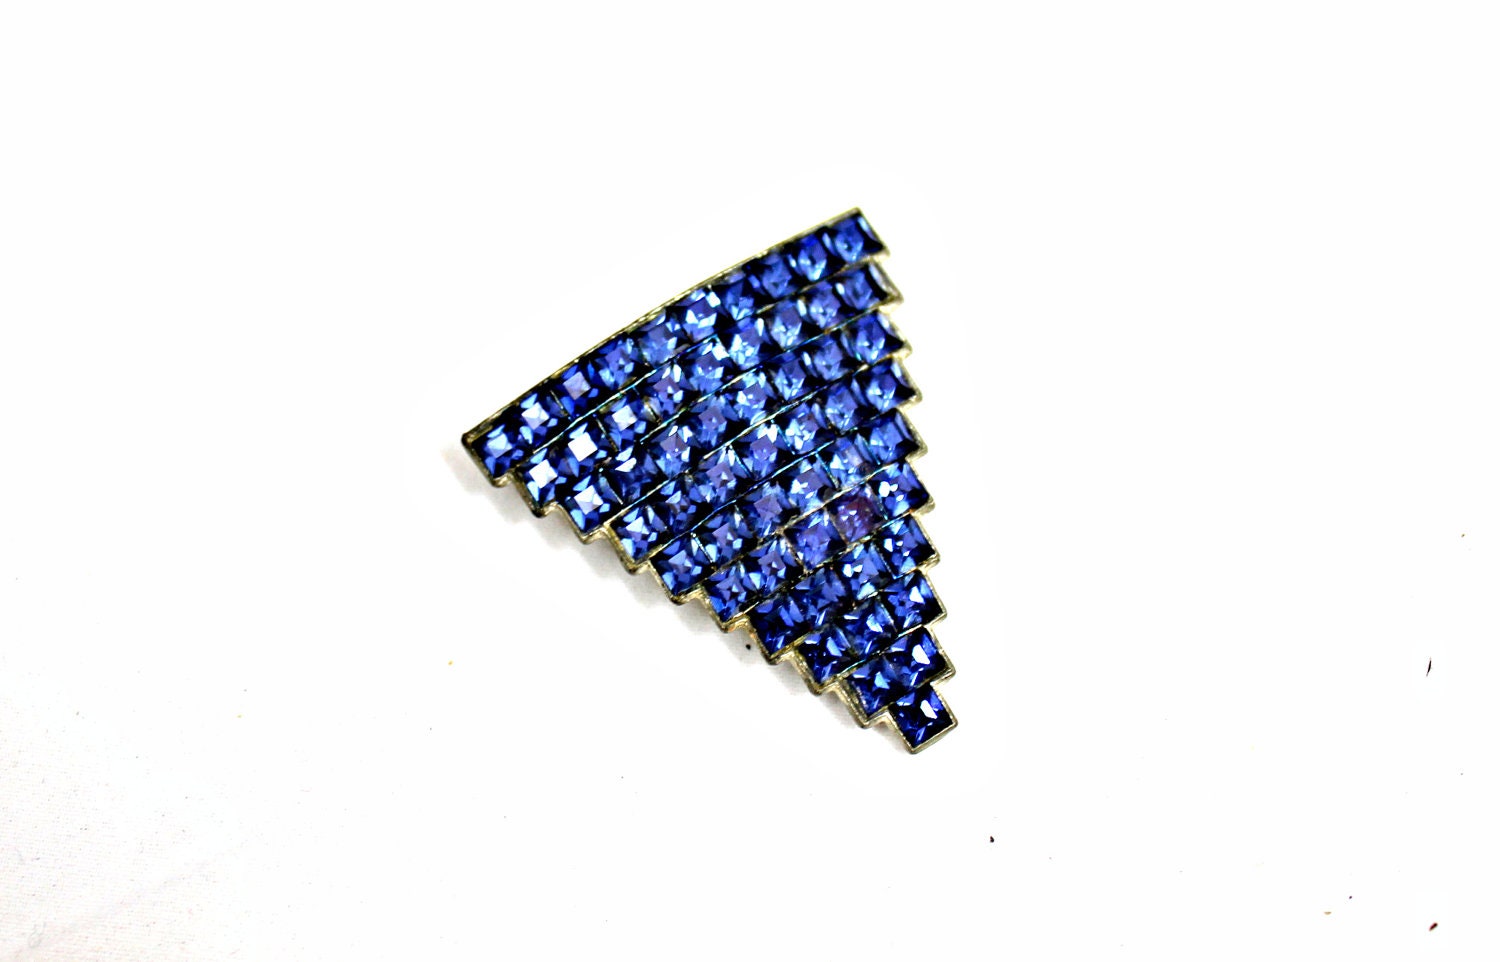 Vintage jewelry art deco brooch, pendent, scarf or fur clip blue rhinestones inverted triangle shape showstopper